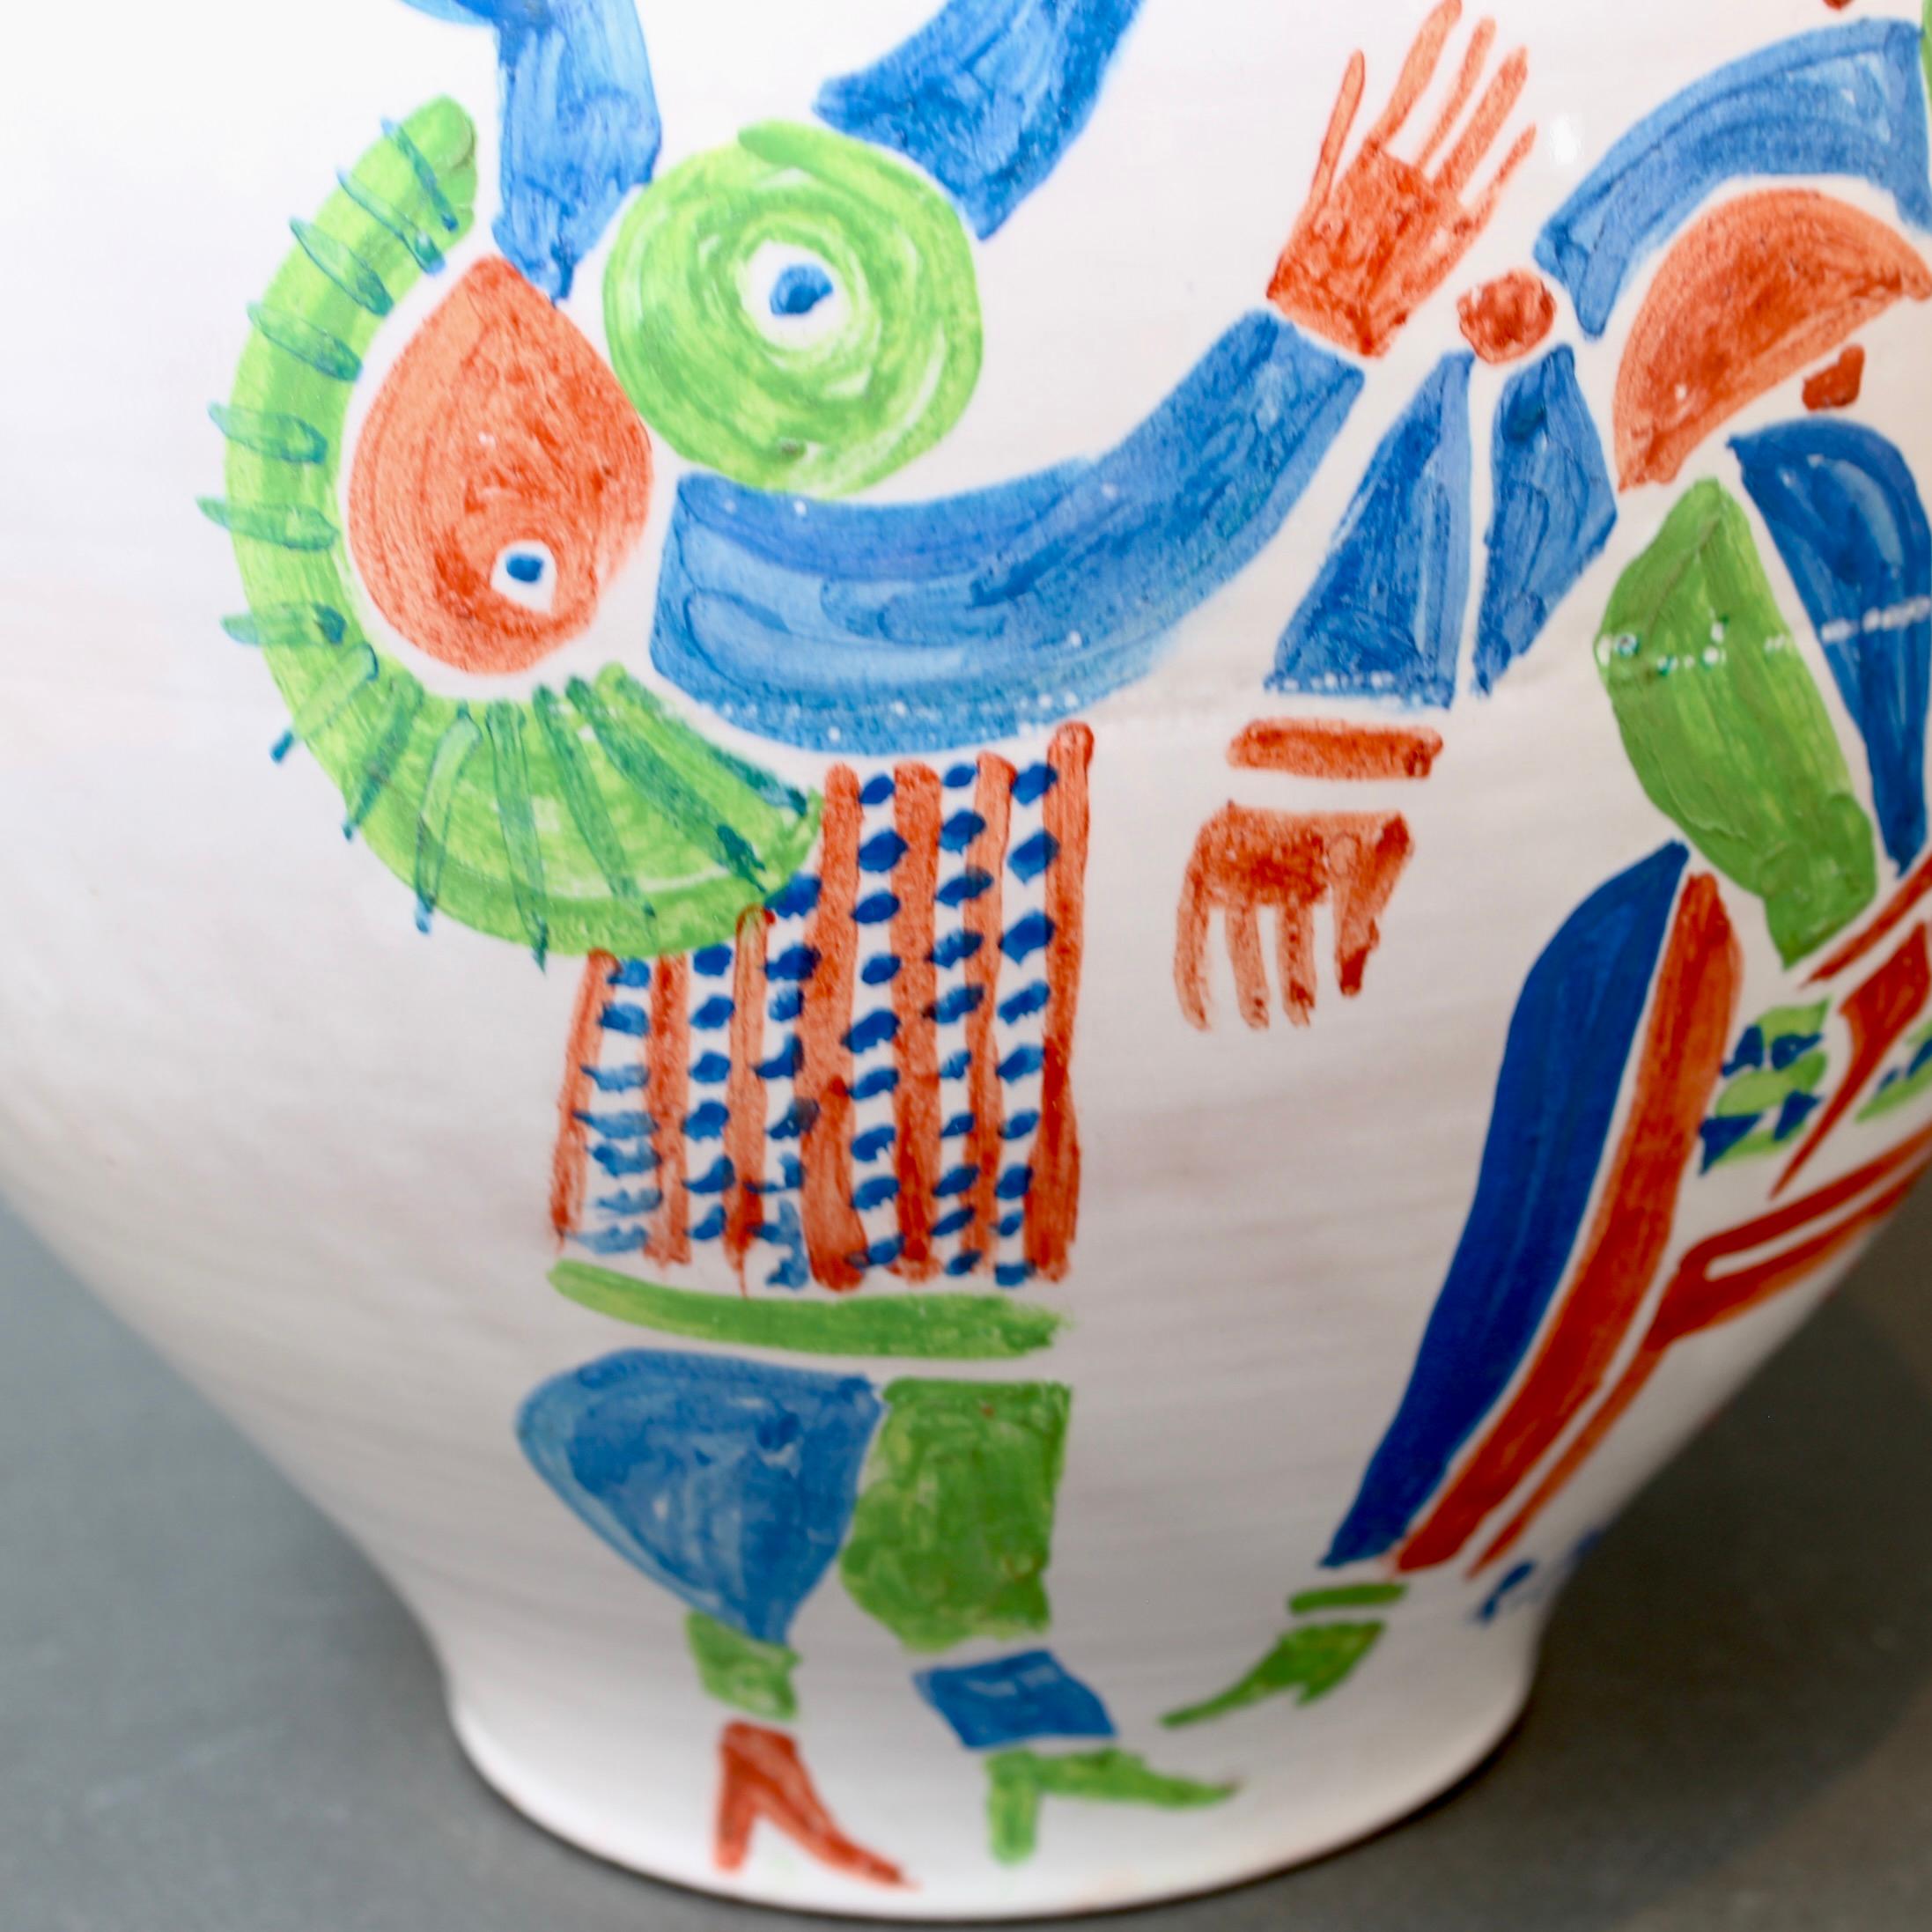 Vintage French Hand-Painted Ceramic Vase by Roger Capron (circa 1960s) For Sale 8